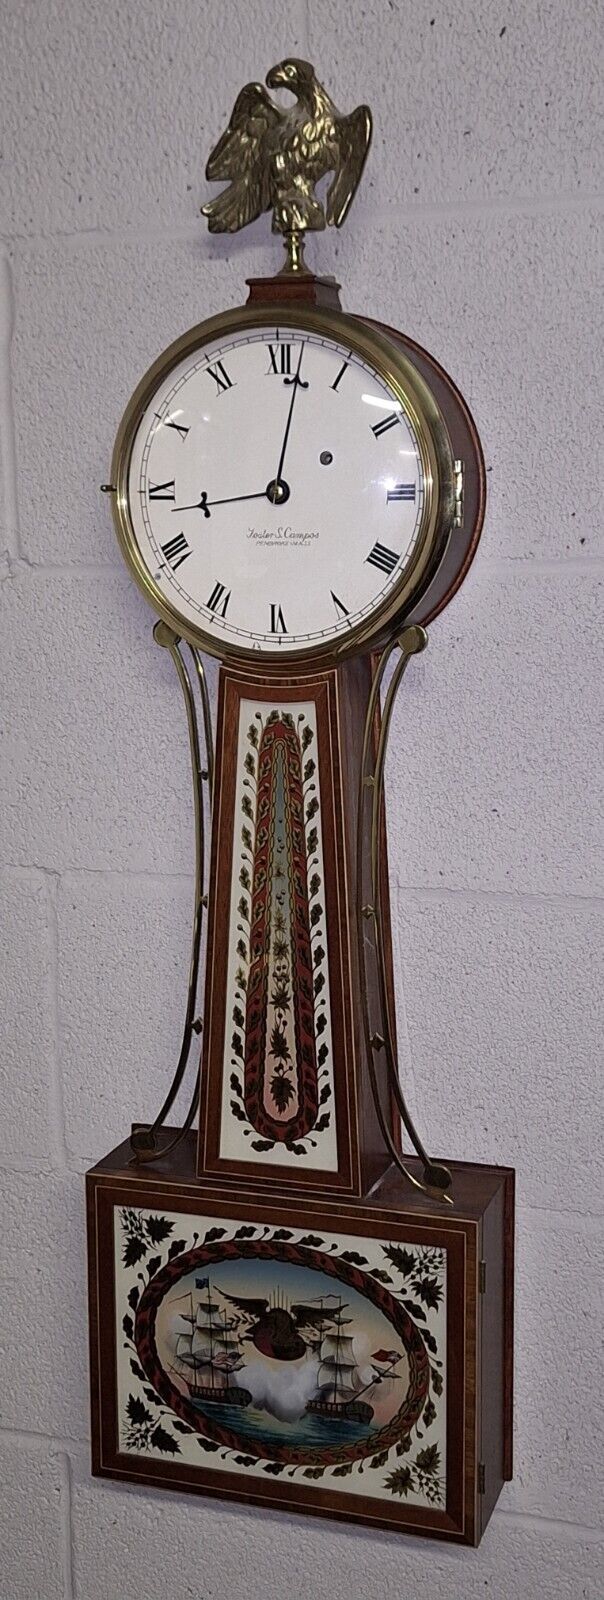 Fine Foster Campos 8 Day Banjo Wall Clock Working Weight Driven Pembroke Mass.